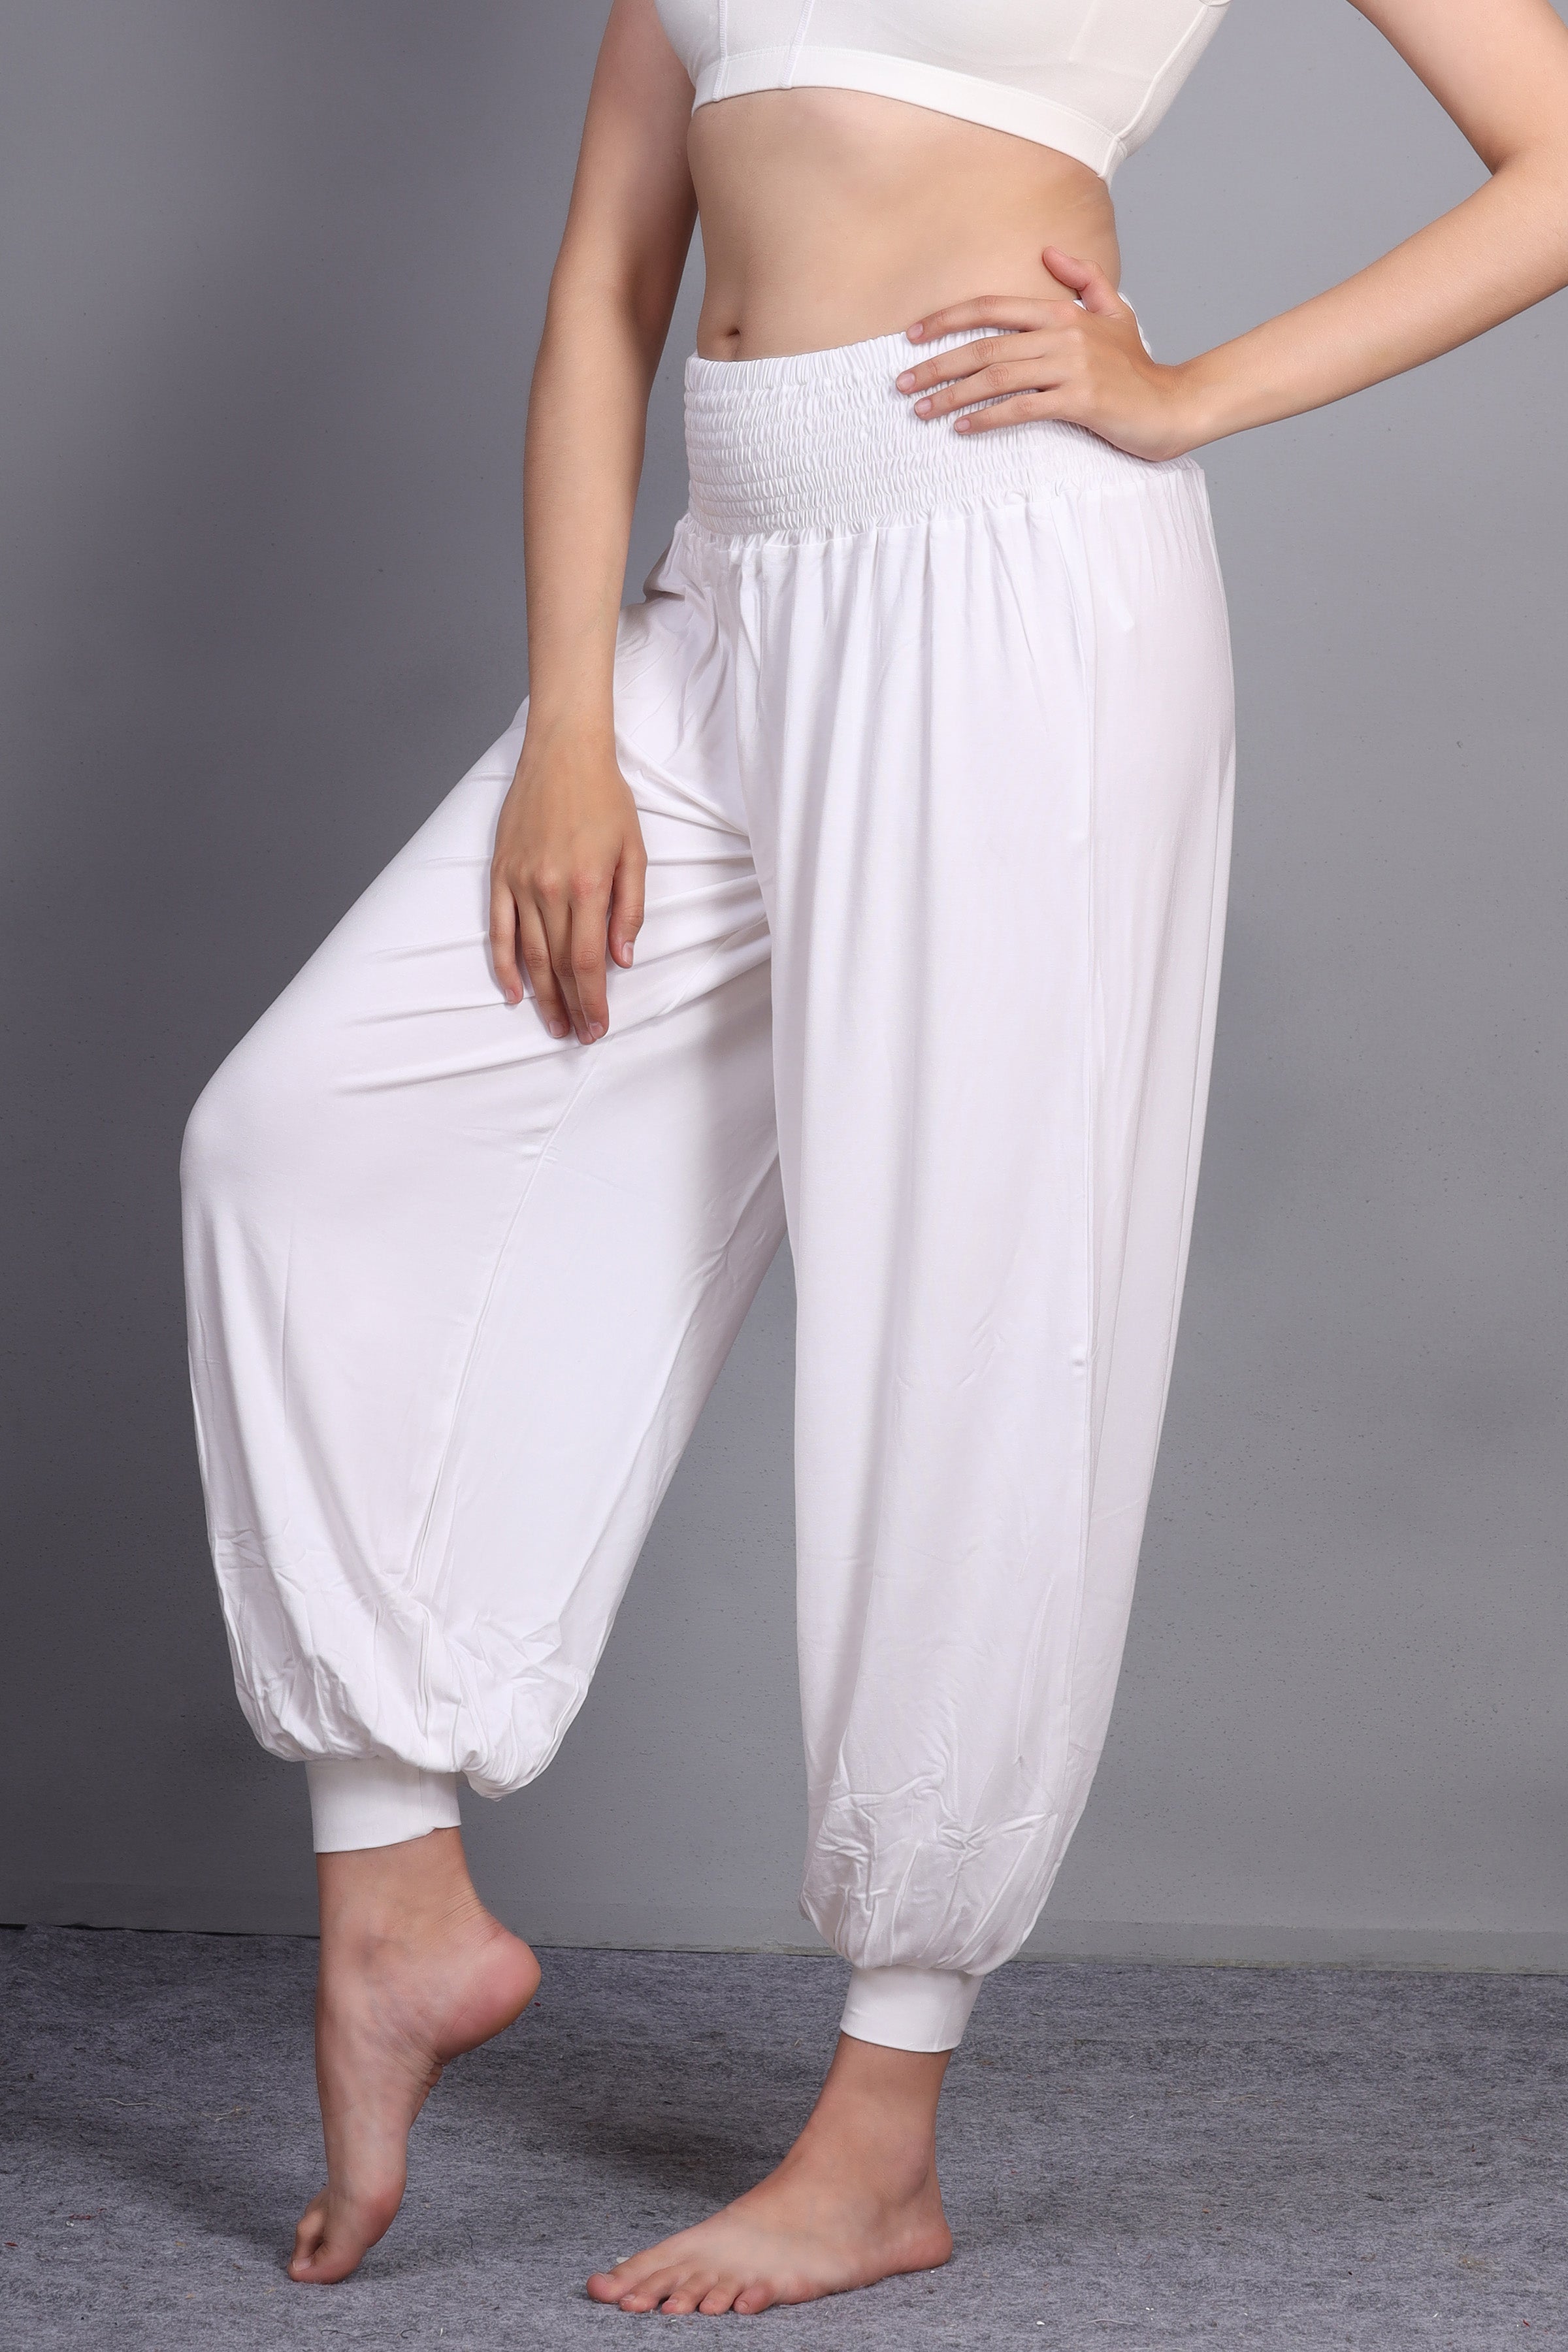 Buy Gennxt Harem Pants White Trousers Alibaba Gypsy Hippie Aladdin Baggy  Genie Women Hmong at Amazon.in